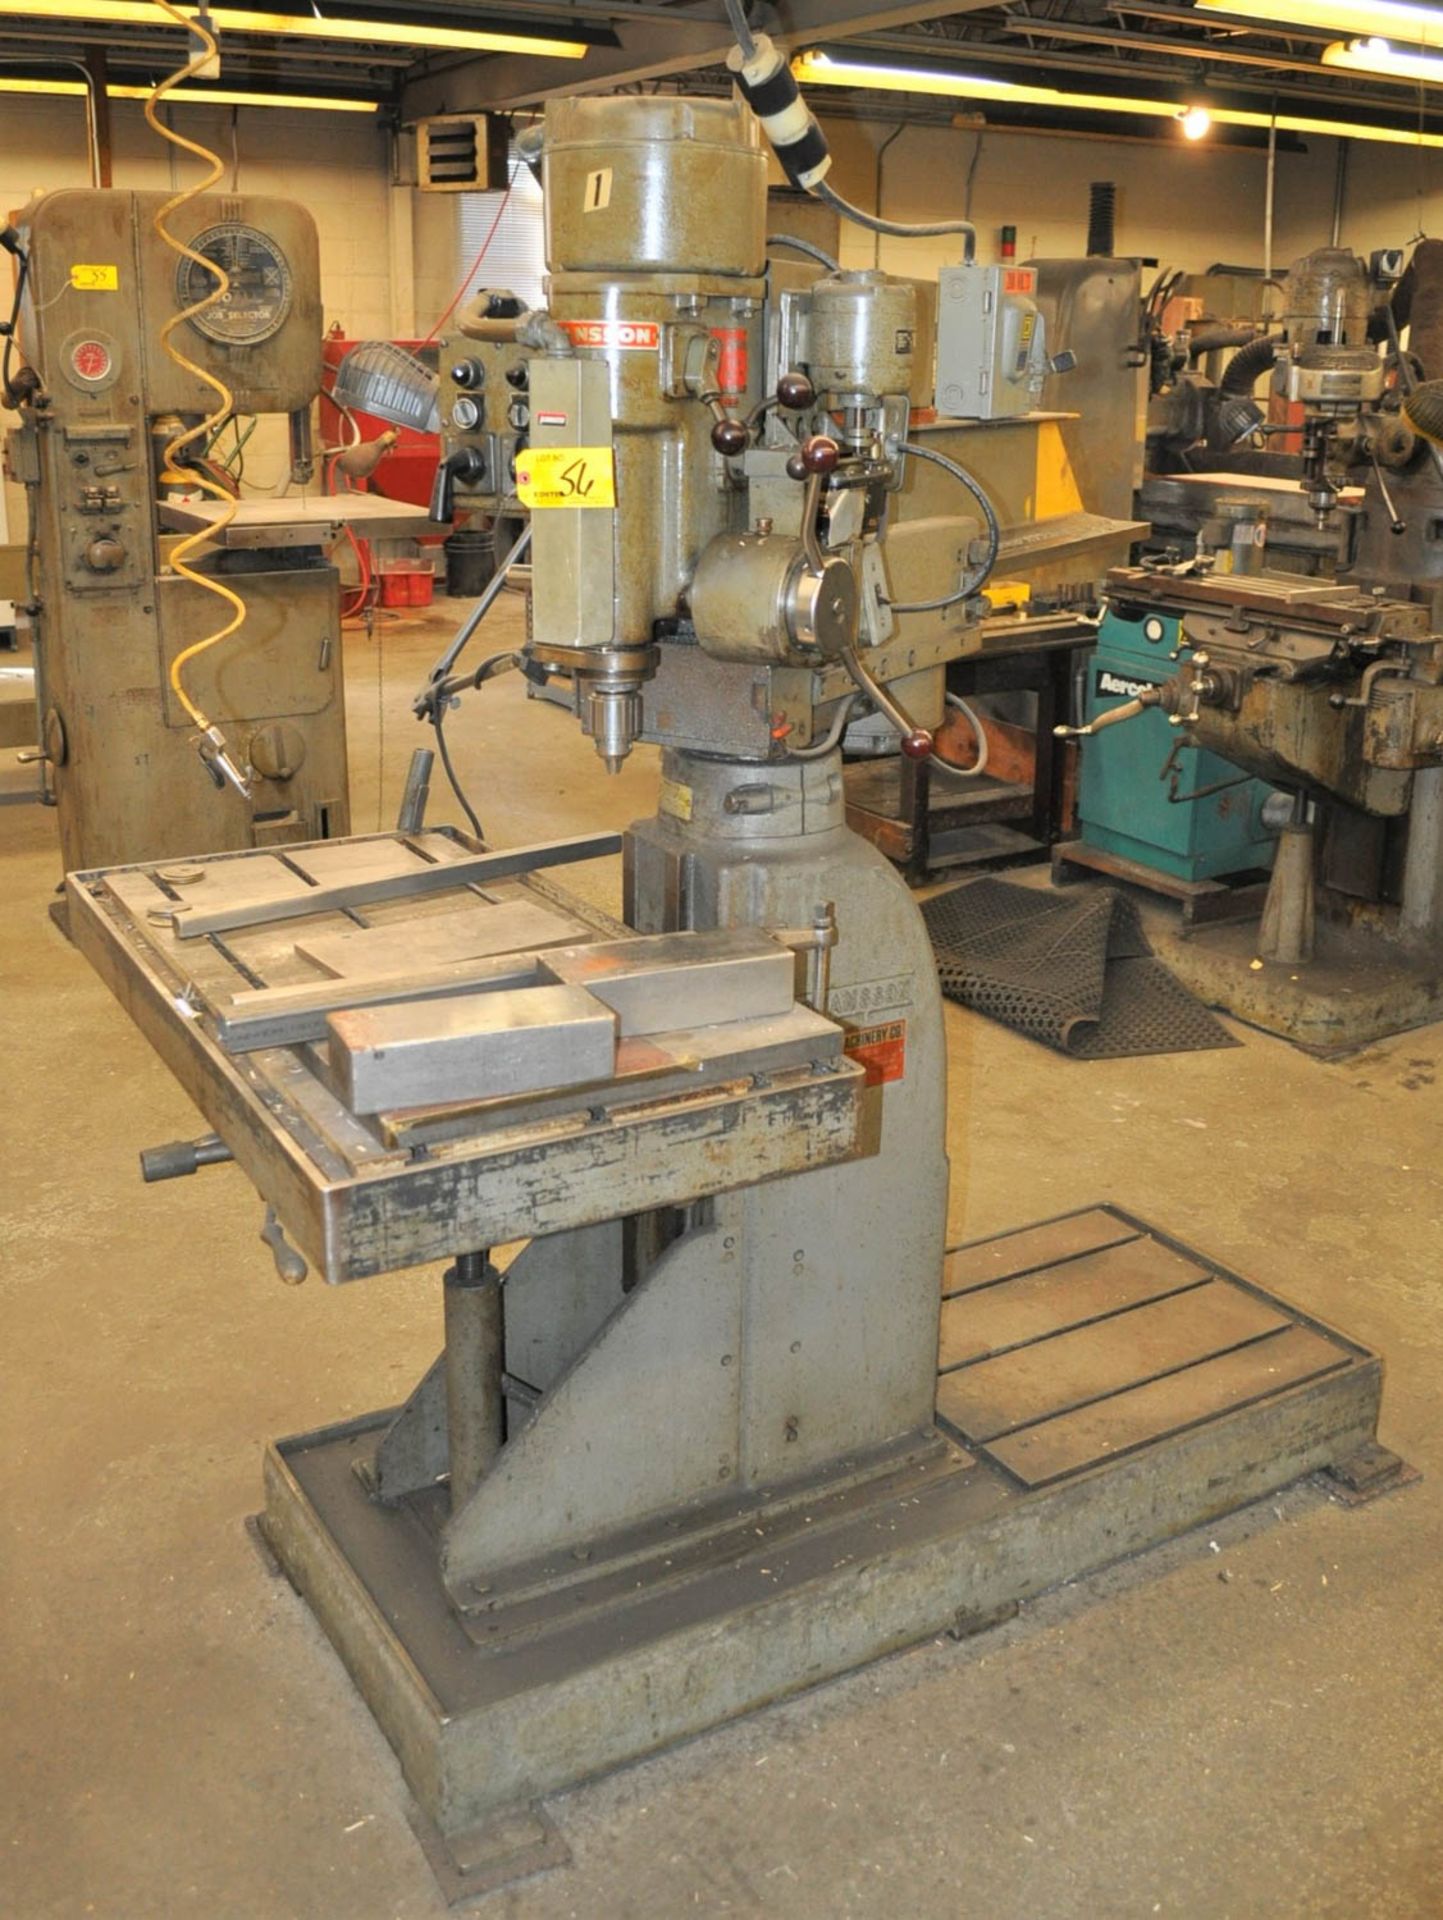 30" JOHANSSON RADIAL ARM DRILL, 37" X 17-3/4" T-SLOTTED TABLE, 8-SPINDLE SPEEDS, 125-1540 RPM, S/